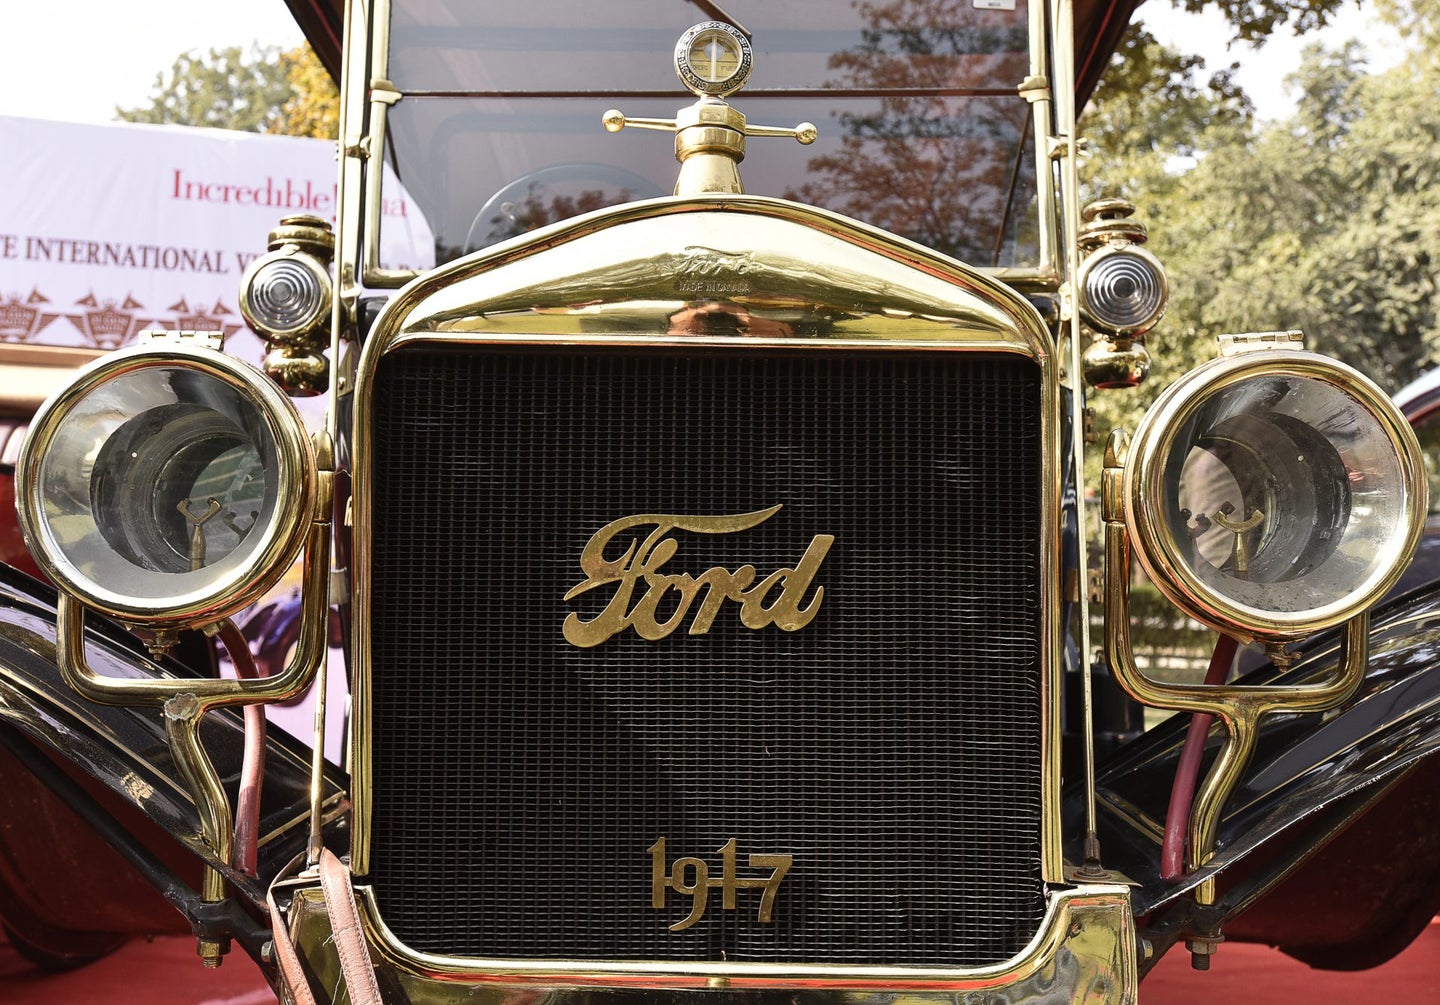 One of the World’s Largest Private Ford Collections to Be Auctioned off This Summer